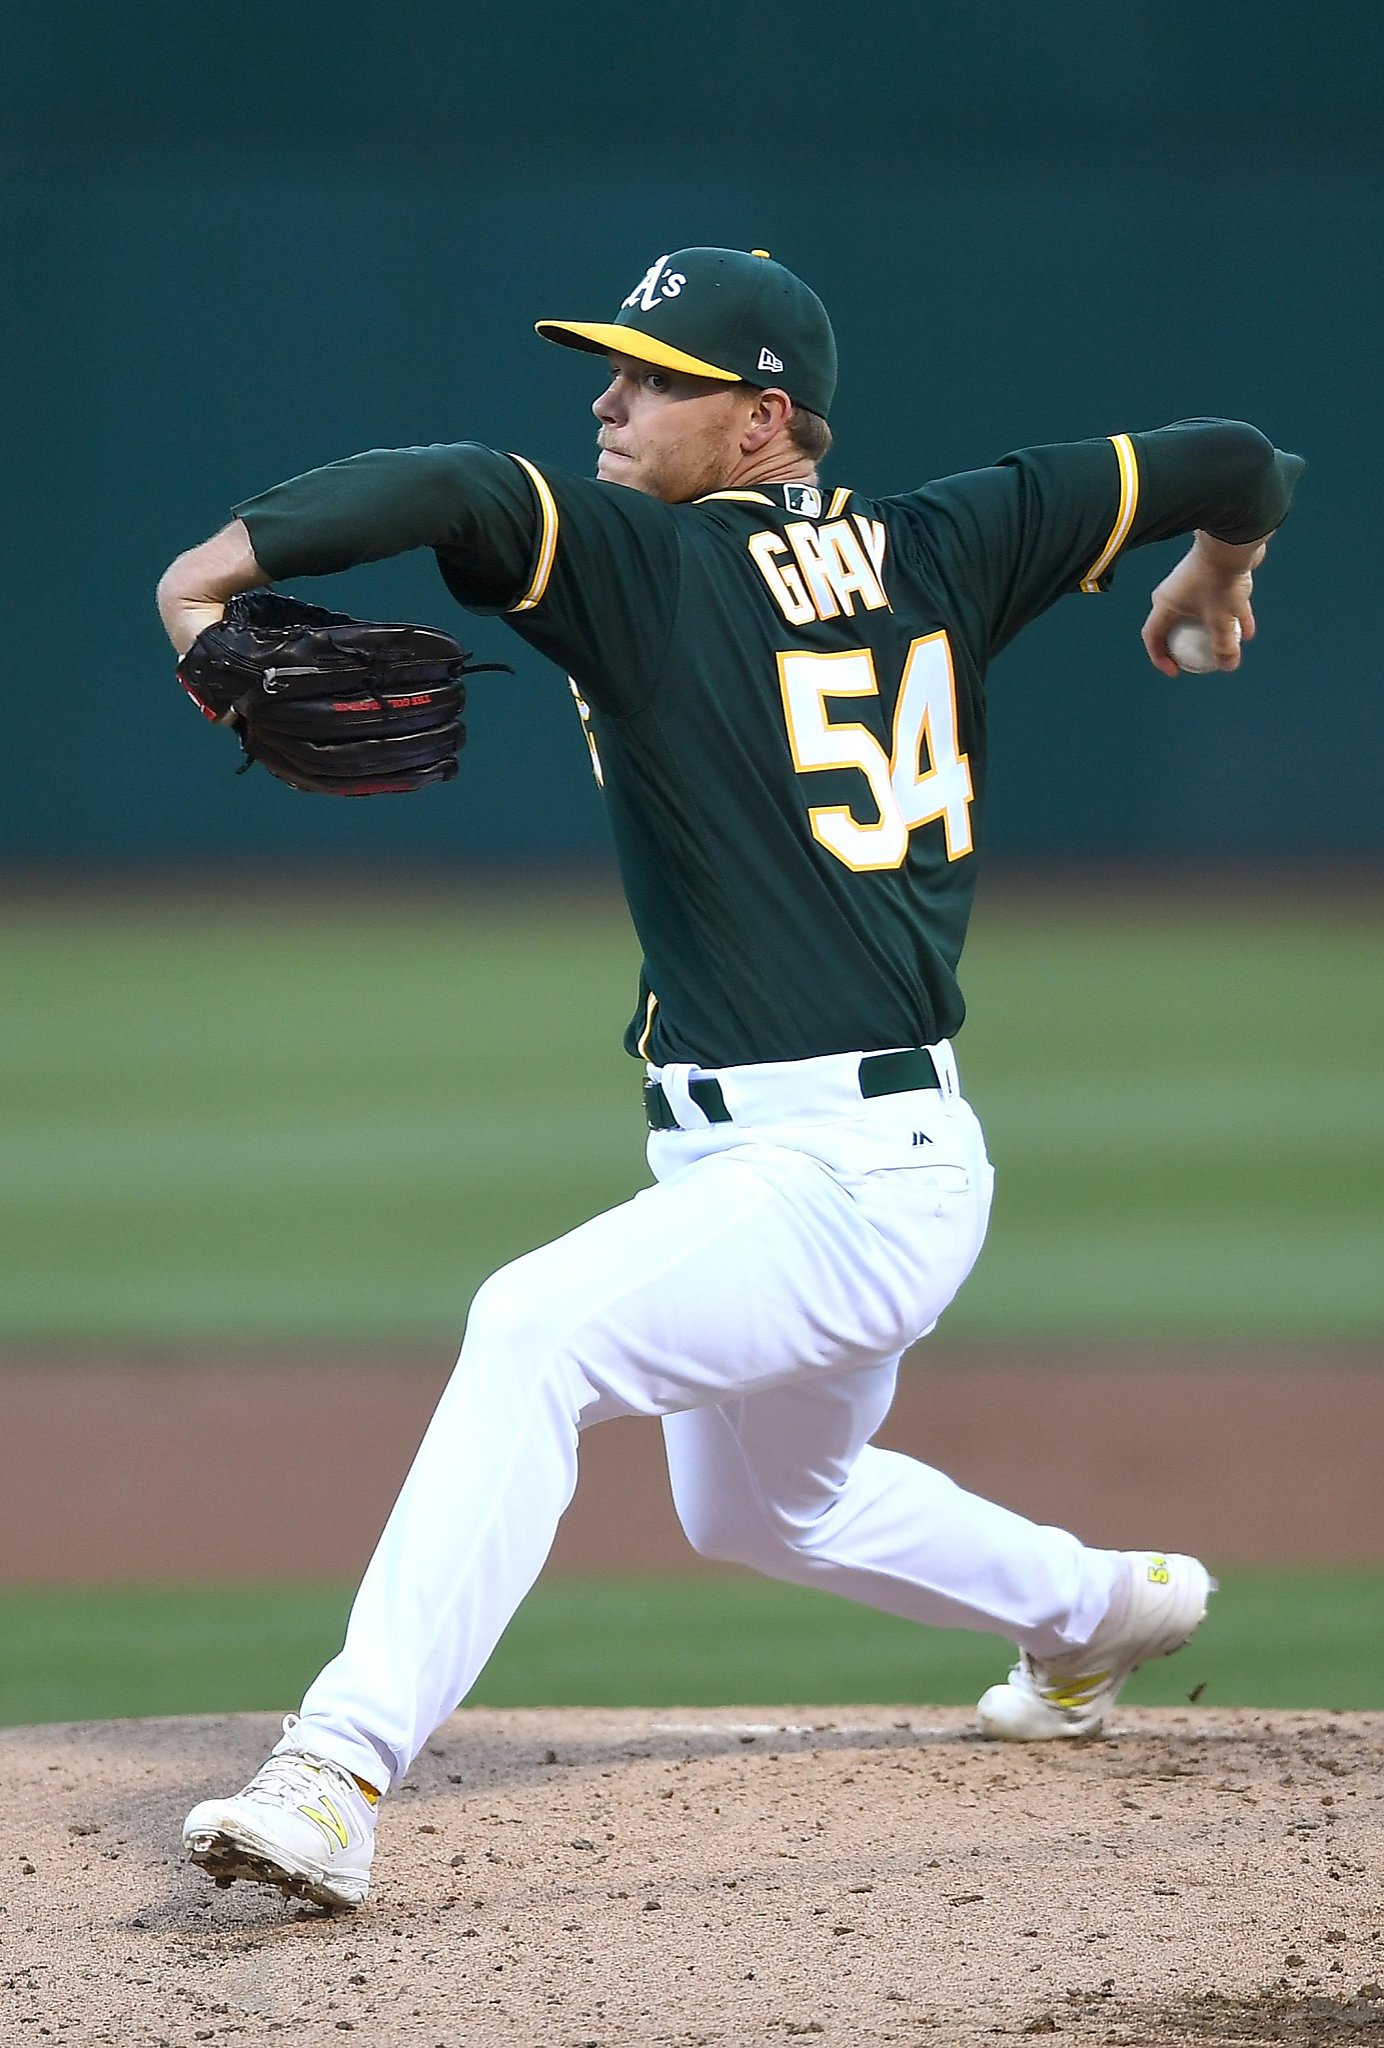 Oakland A's: Why Sonny Gray Is Not the Athletics' Next Great